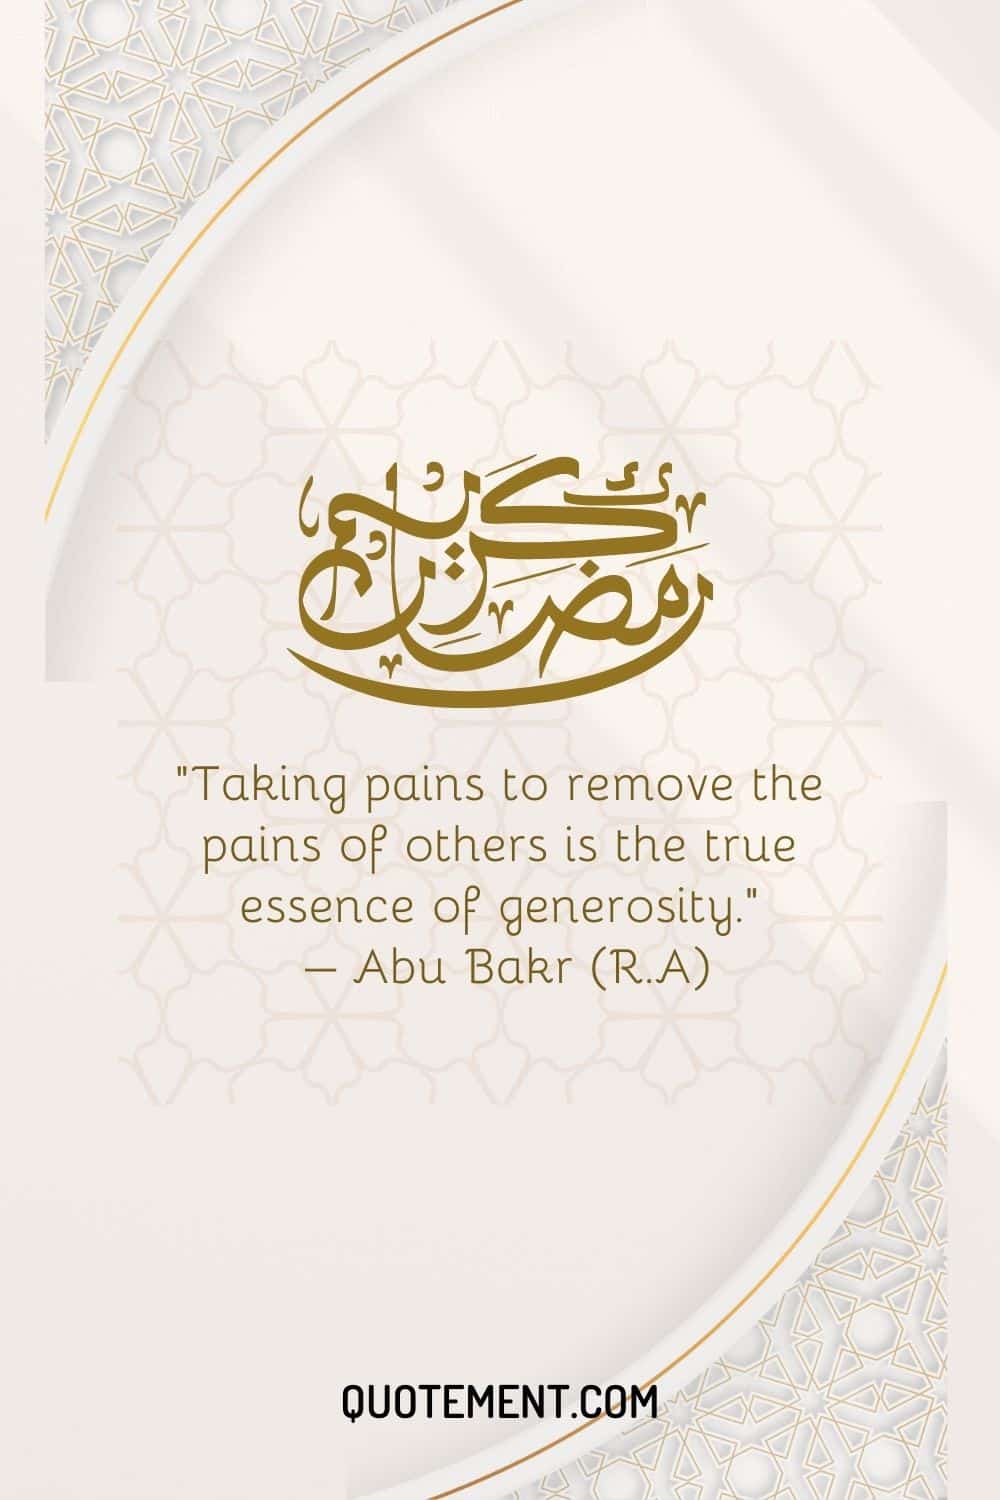 Taking pains to remove the pains of others is the true essence of generosity